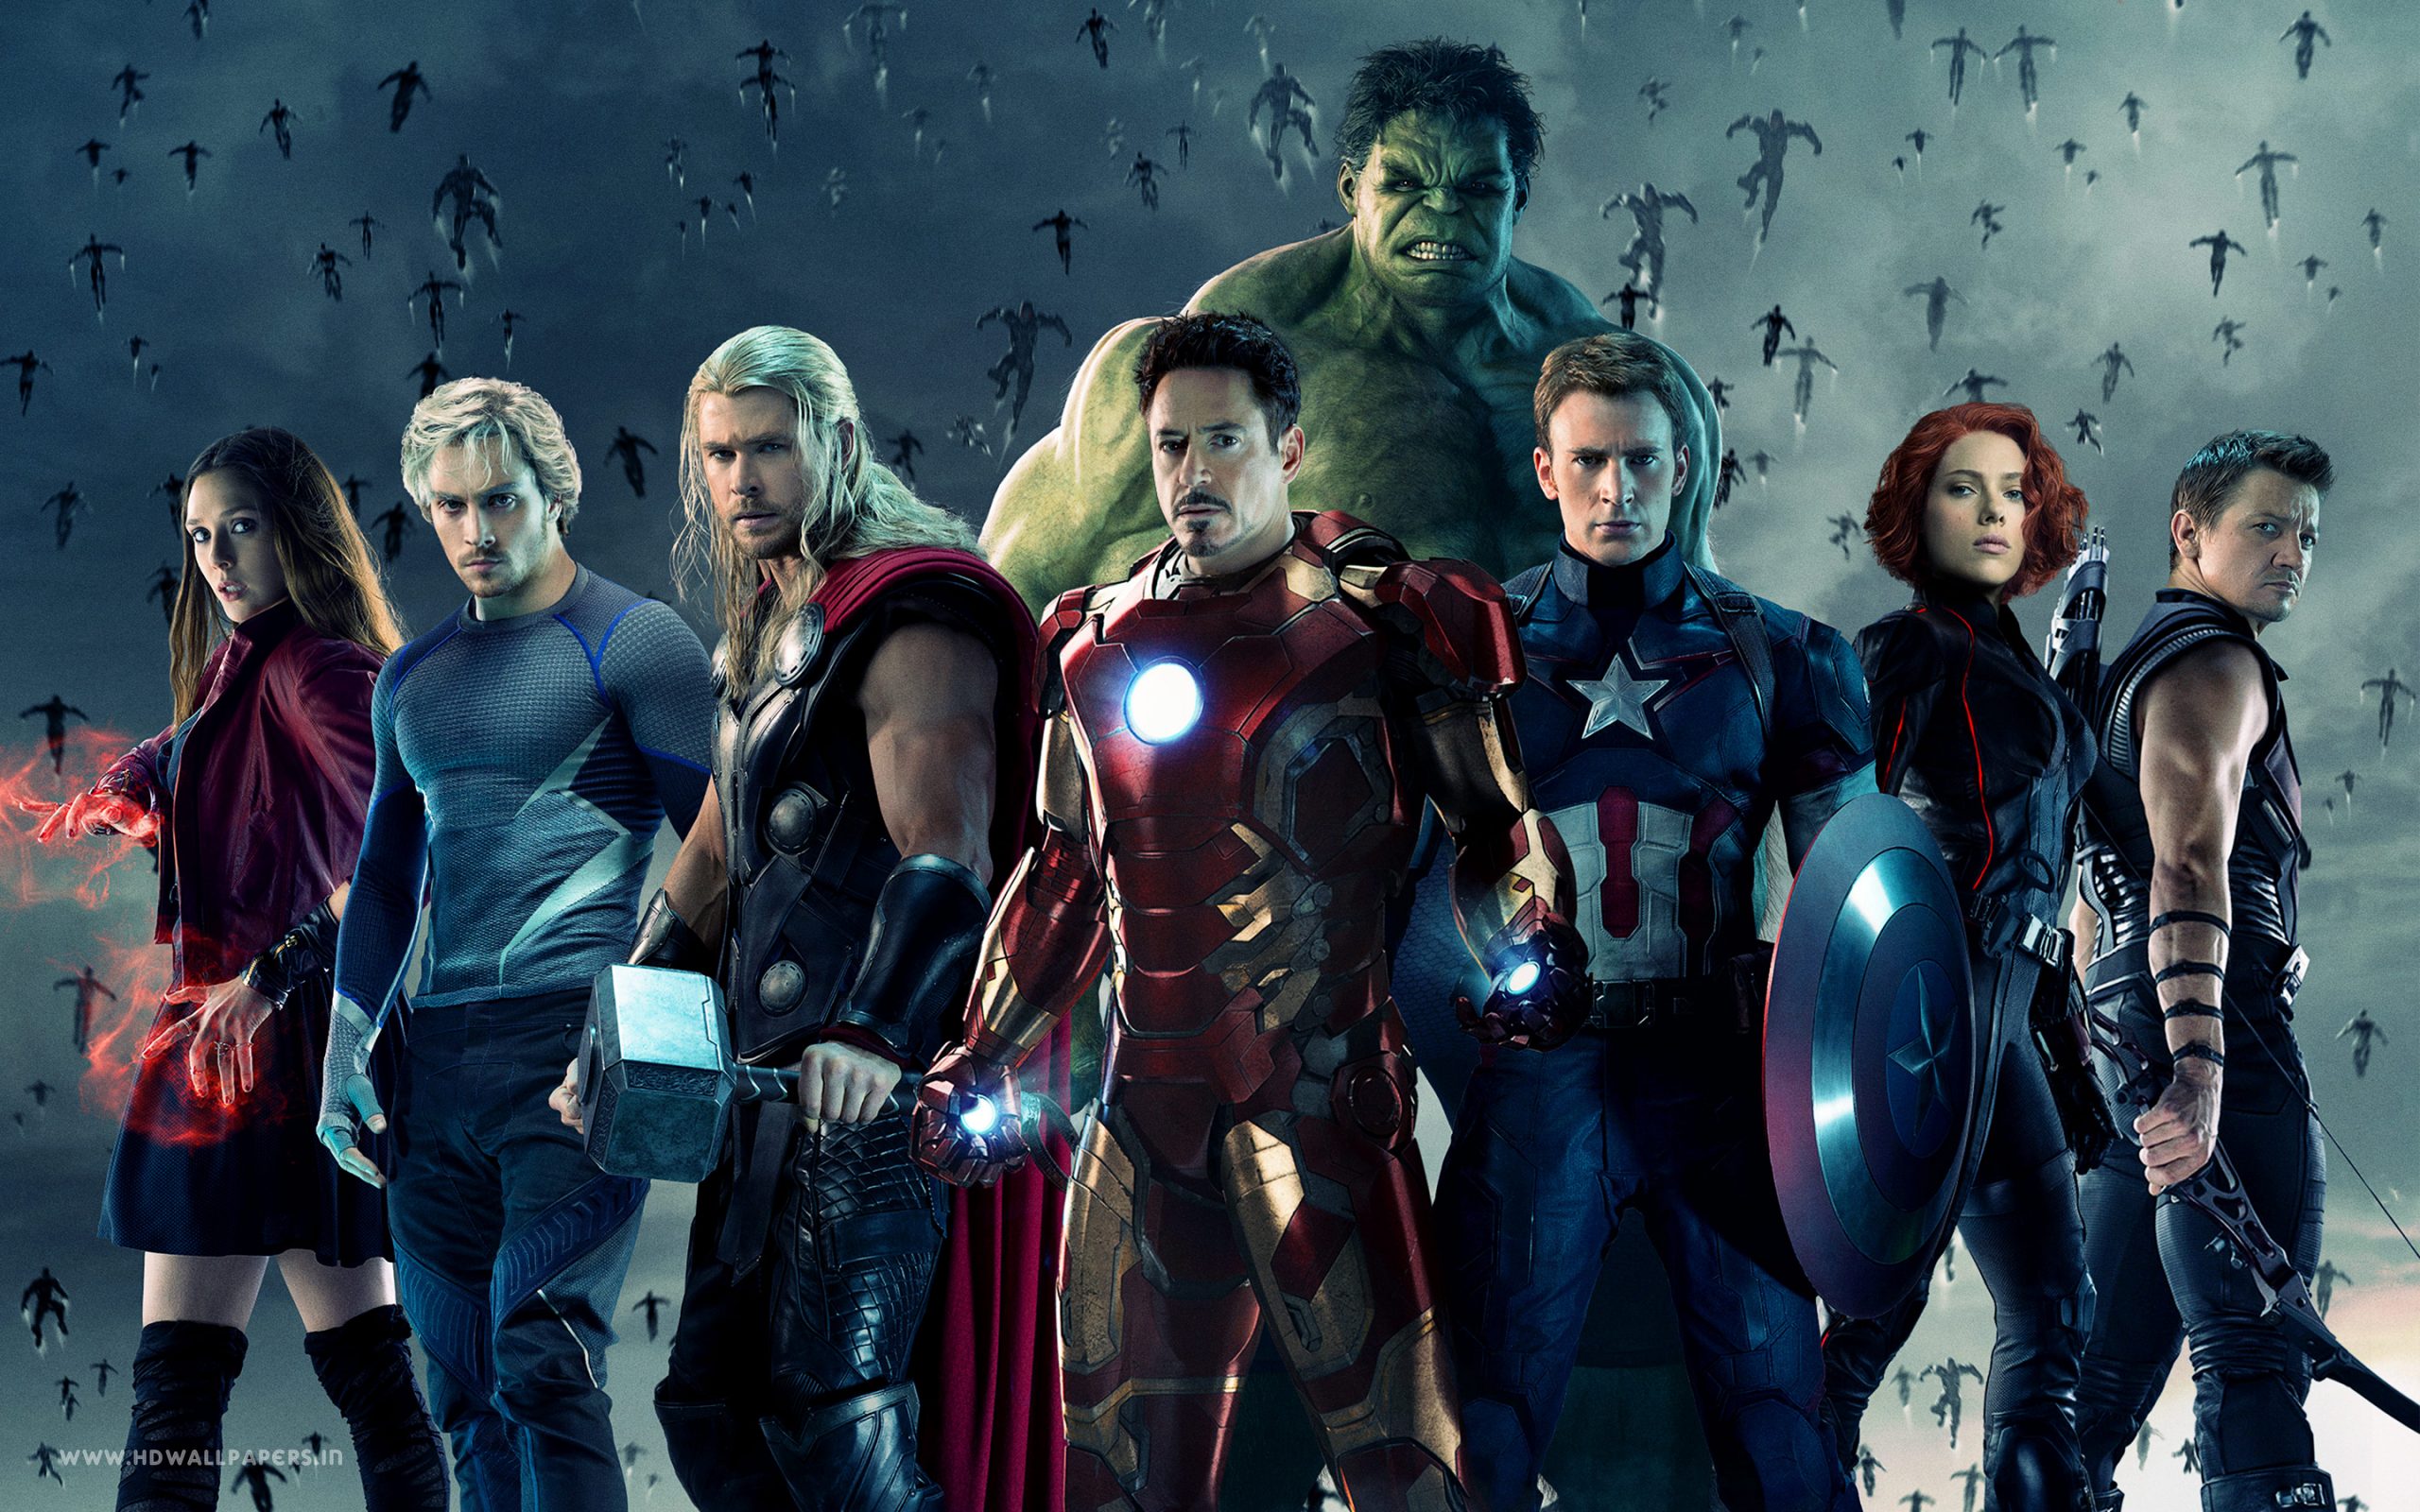 Bring On The ‘Age of Ultron’! [Movie Review]